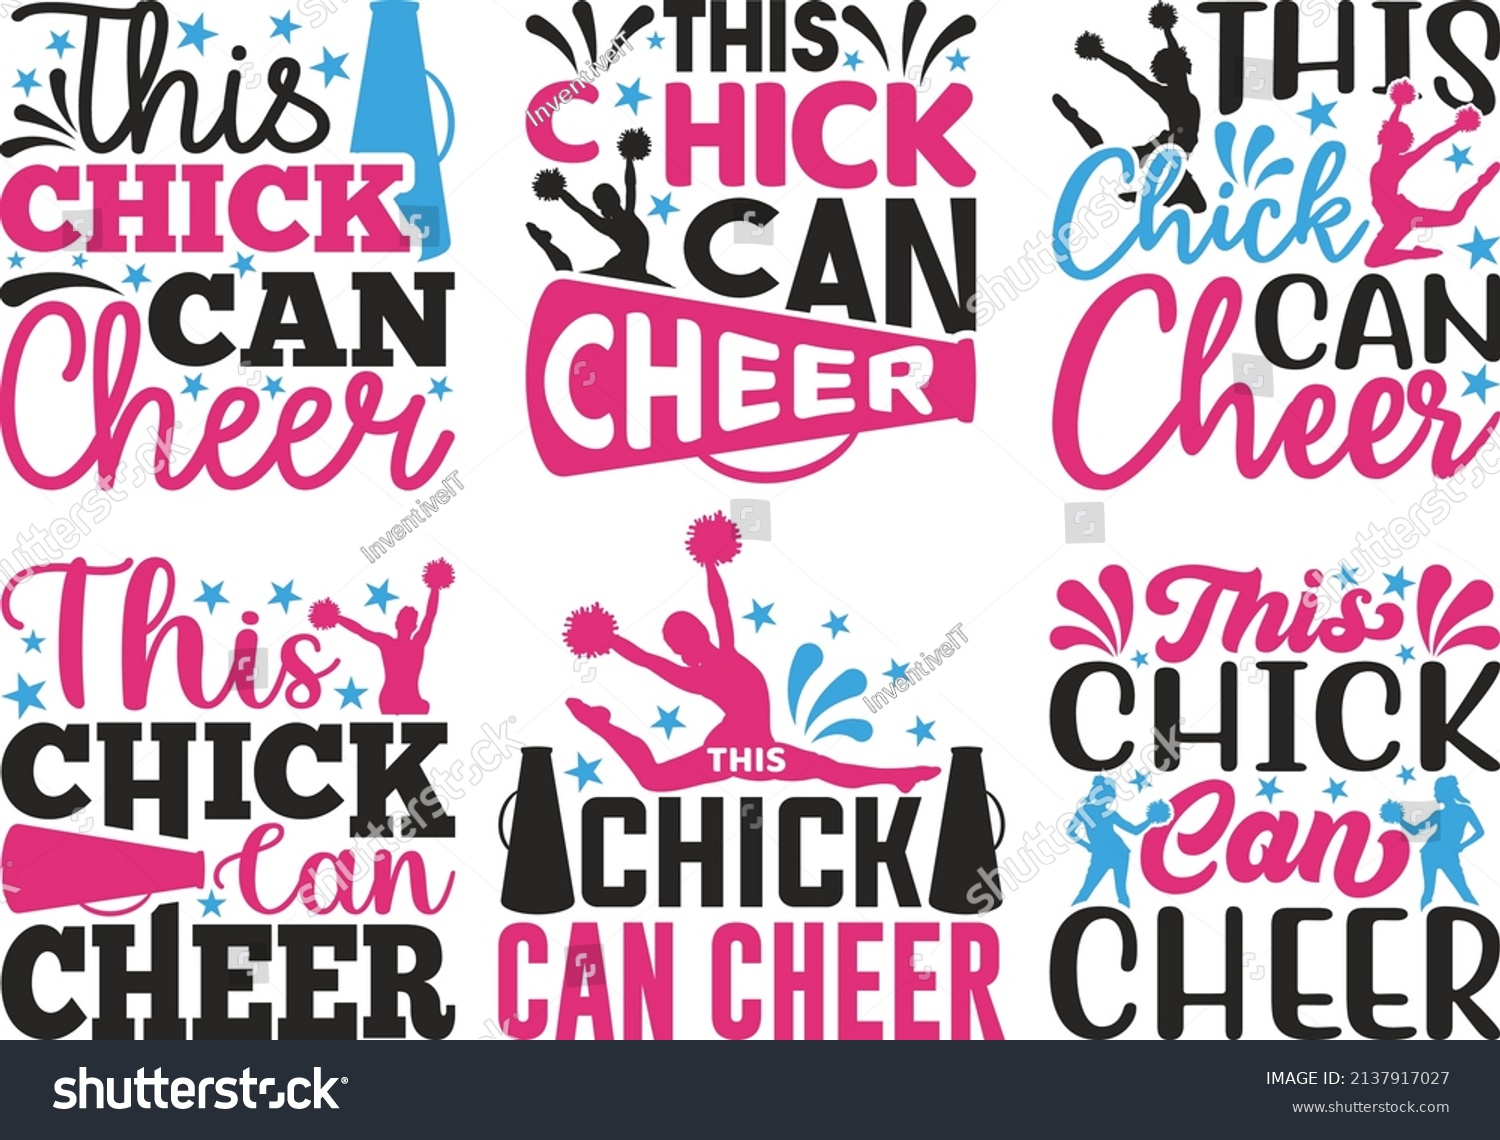 SVG of 
This Chick Can Cheer Holiday Printable Vector Illustration svg